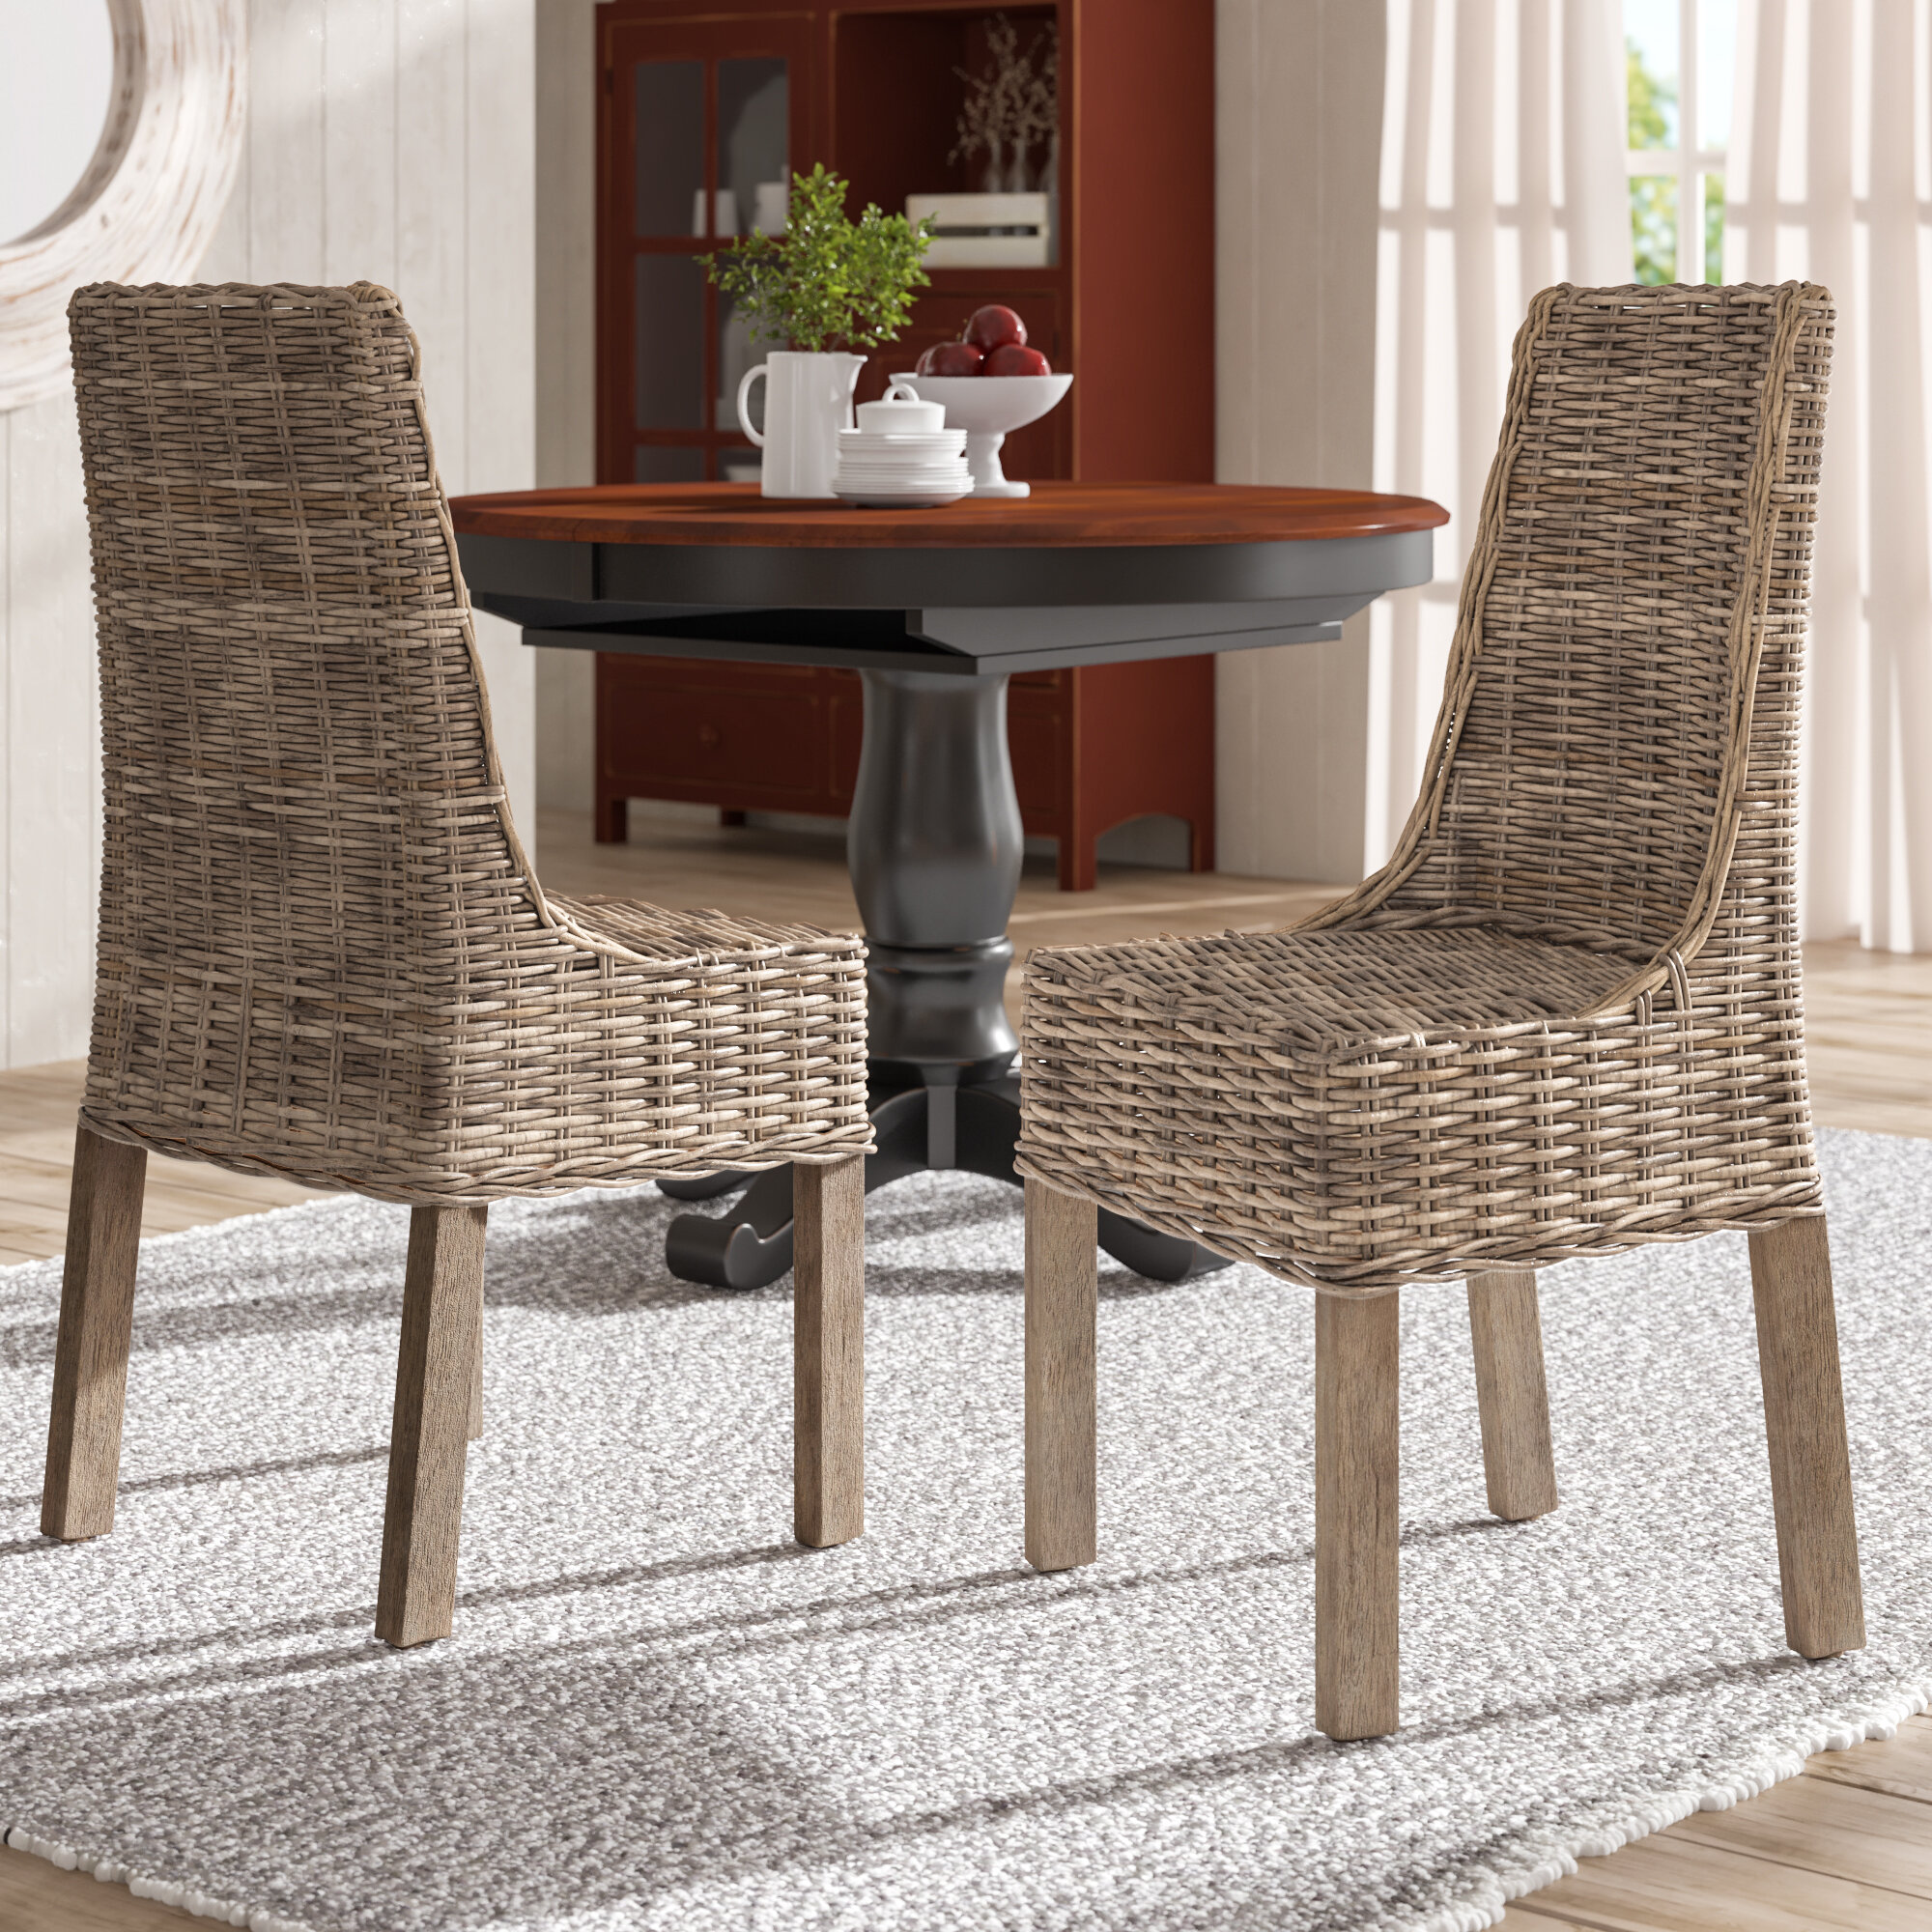 Wicker Rattan Kitchen Dining Chairs Free Shipping Over 35 Wayfair